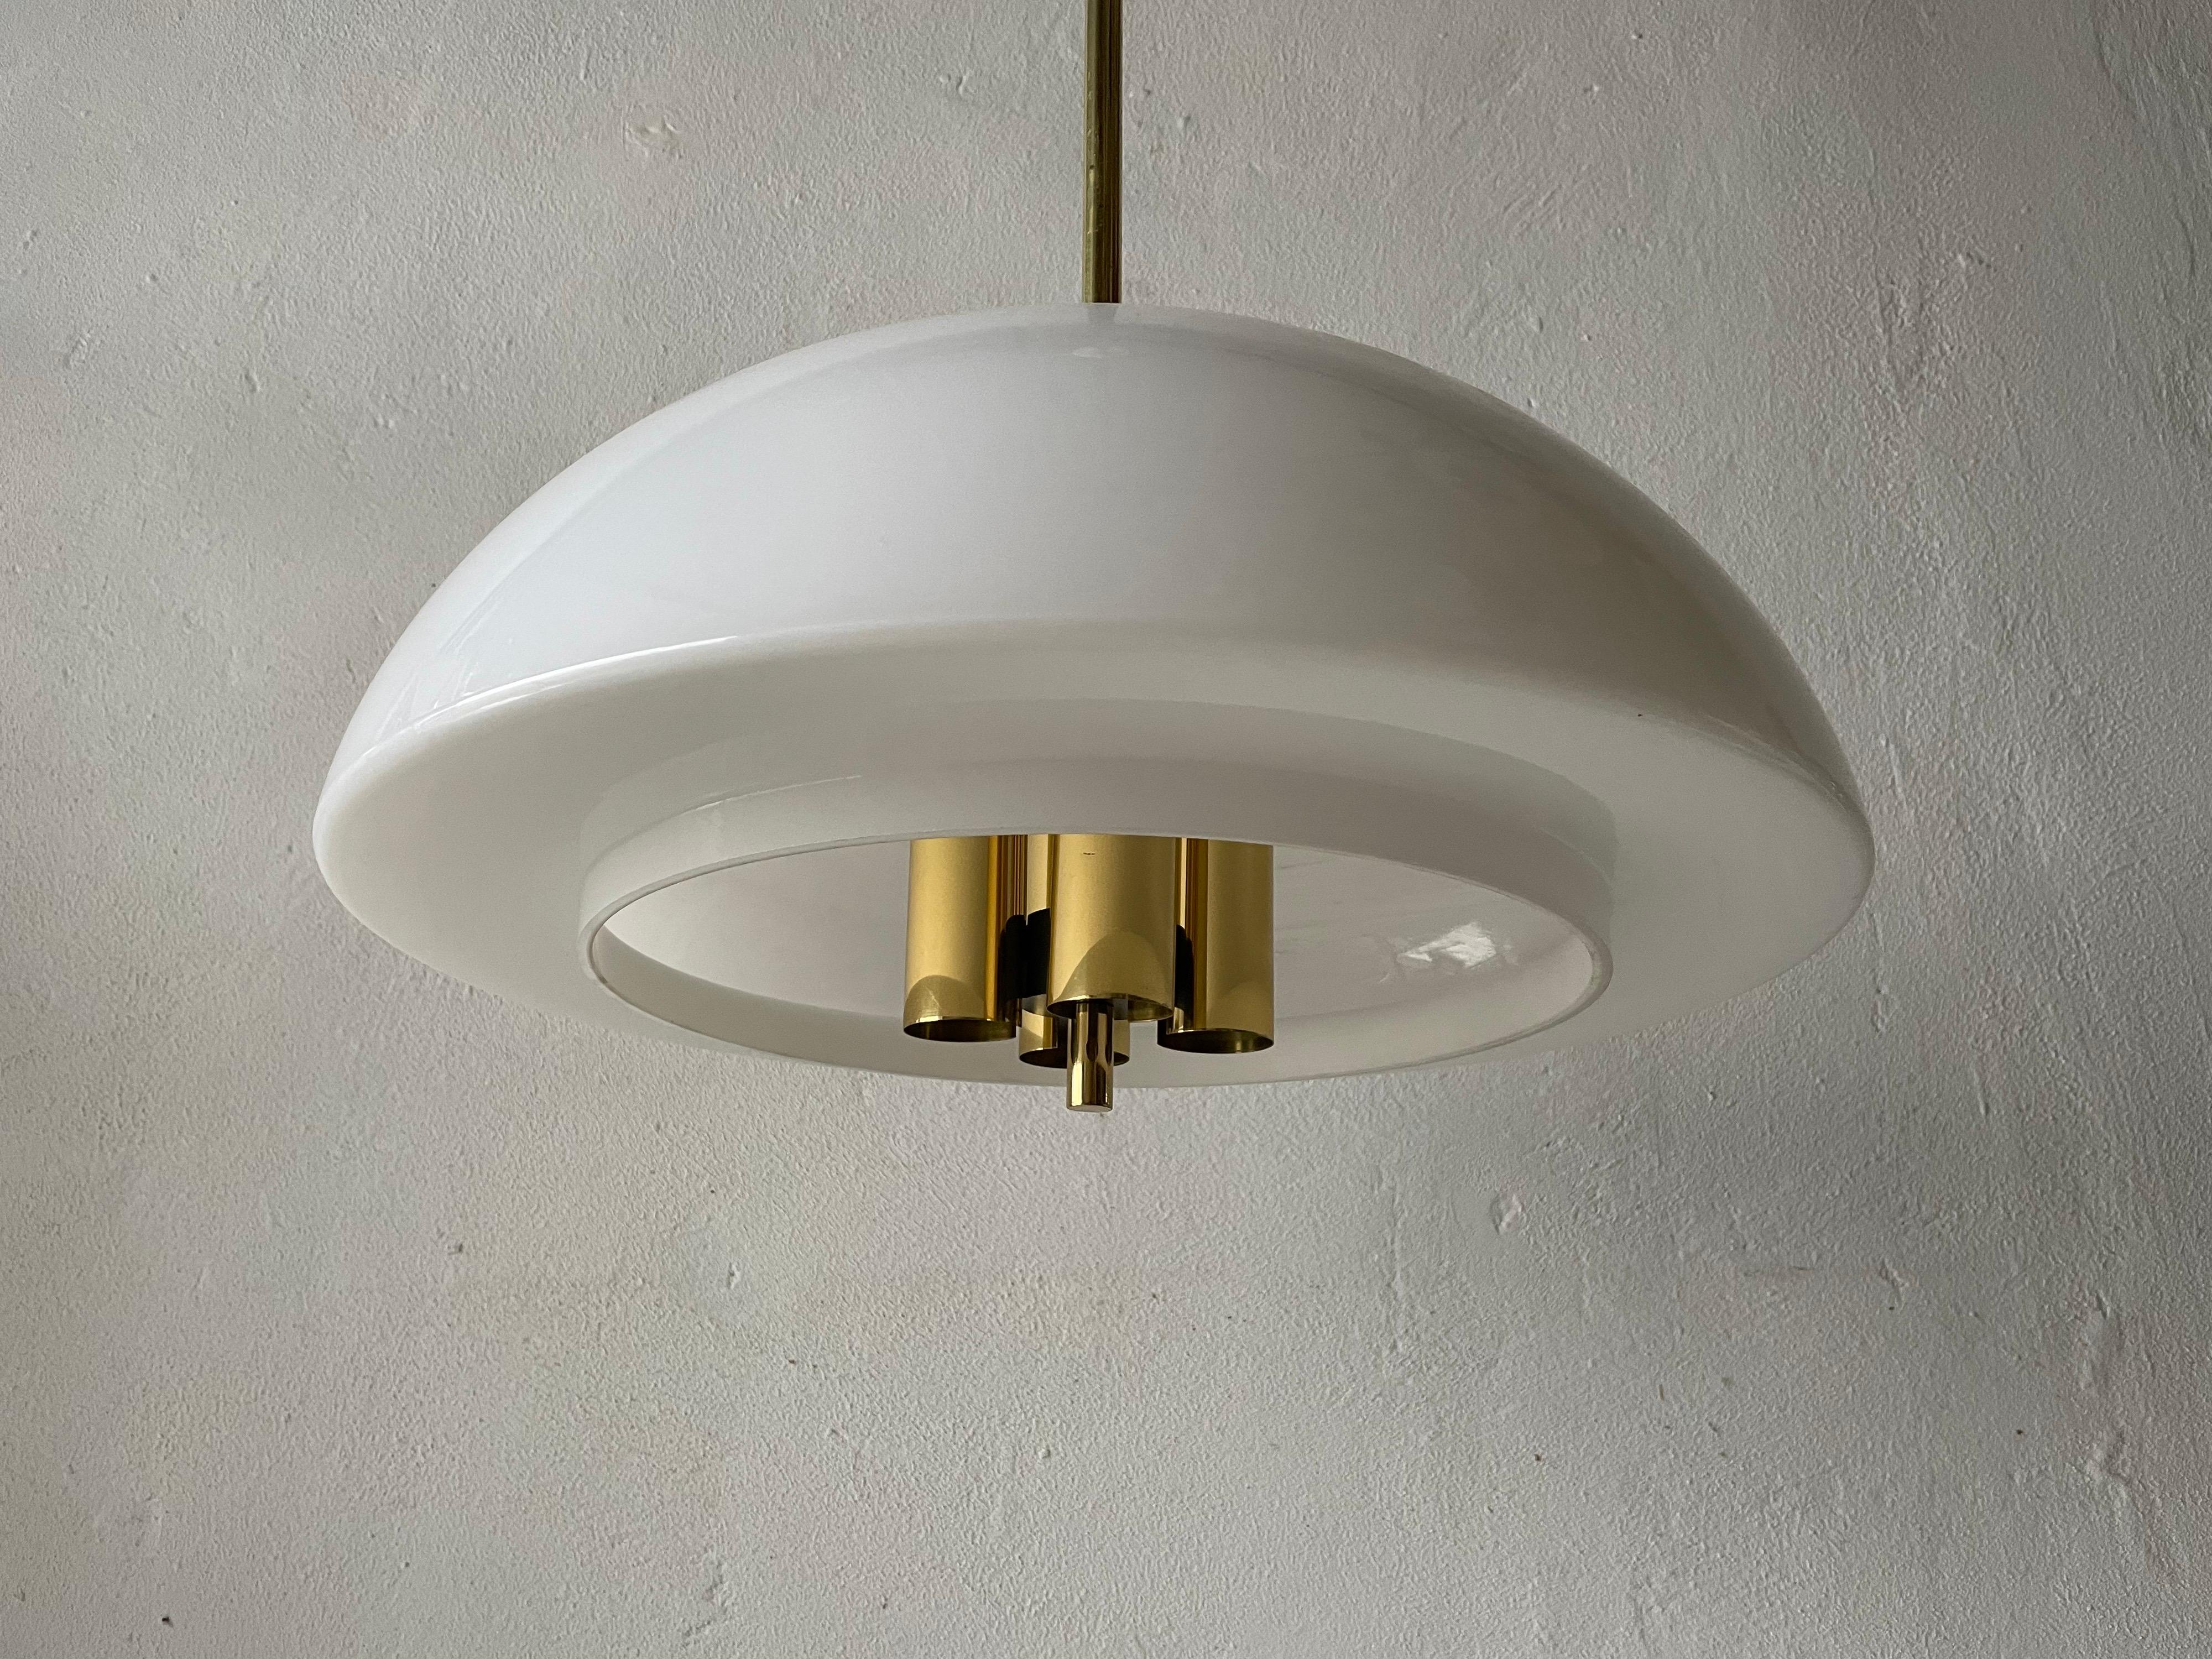 Rare opaline glass & brass lux pendant lamp by Limburg, 1960s, Germany

Lampshade is in very good vintage condition.

This lamp works with 4 x E27 light bulbs. 
Wired and suitable to use with 220V and 110V for all